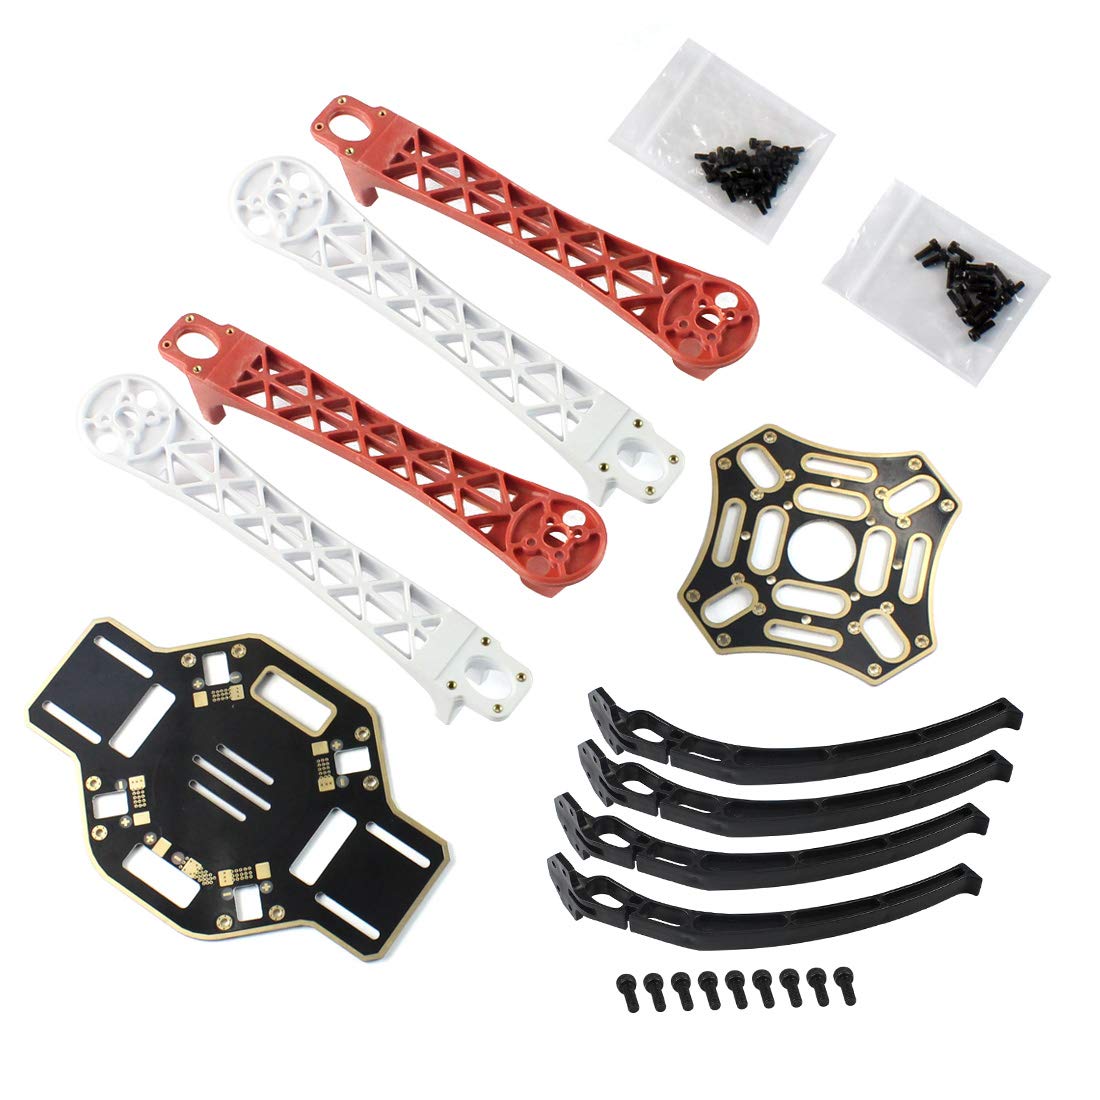 QWinOut DIY 2.4G 8CH KK V2.3 /APM2.8 F450 Frame RC Quadcopter 4-Axle UFO Unassembly Kit RTF/ARF Drone (Airframe with Landing Skid)